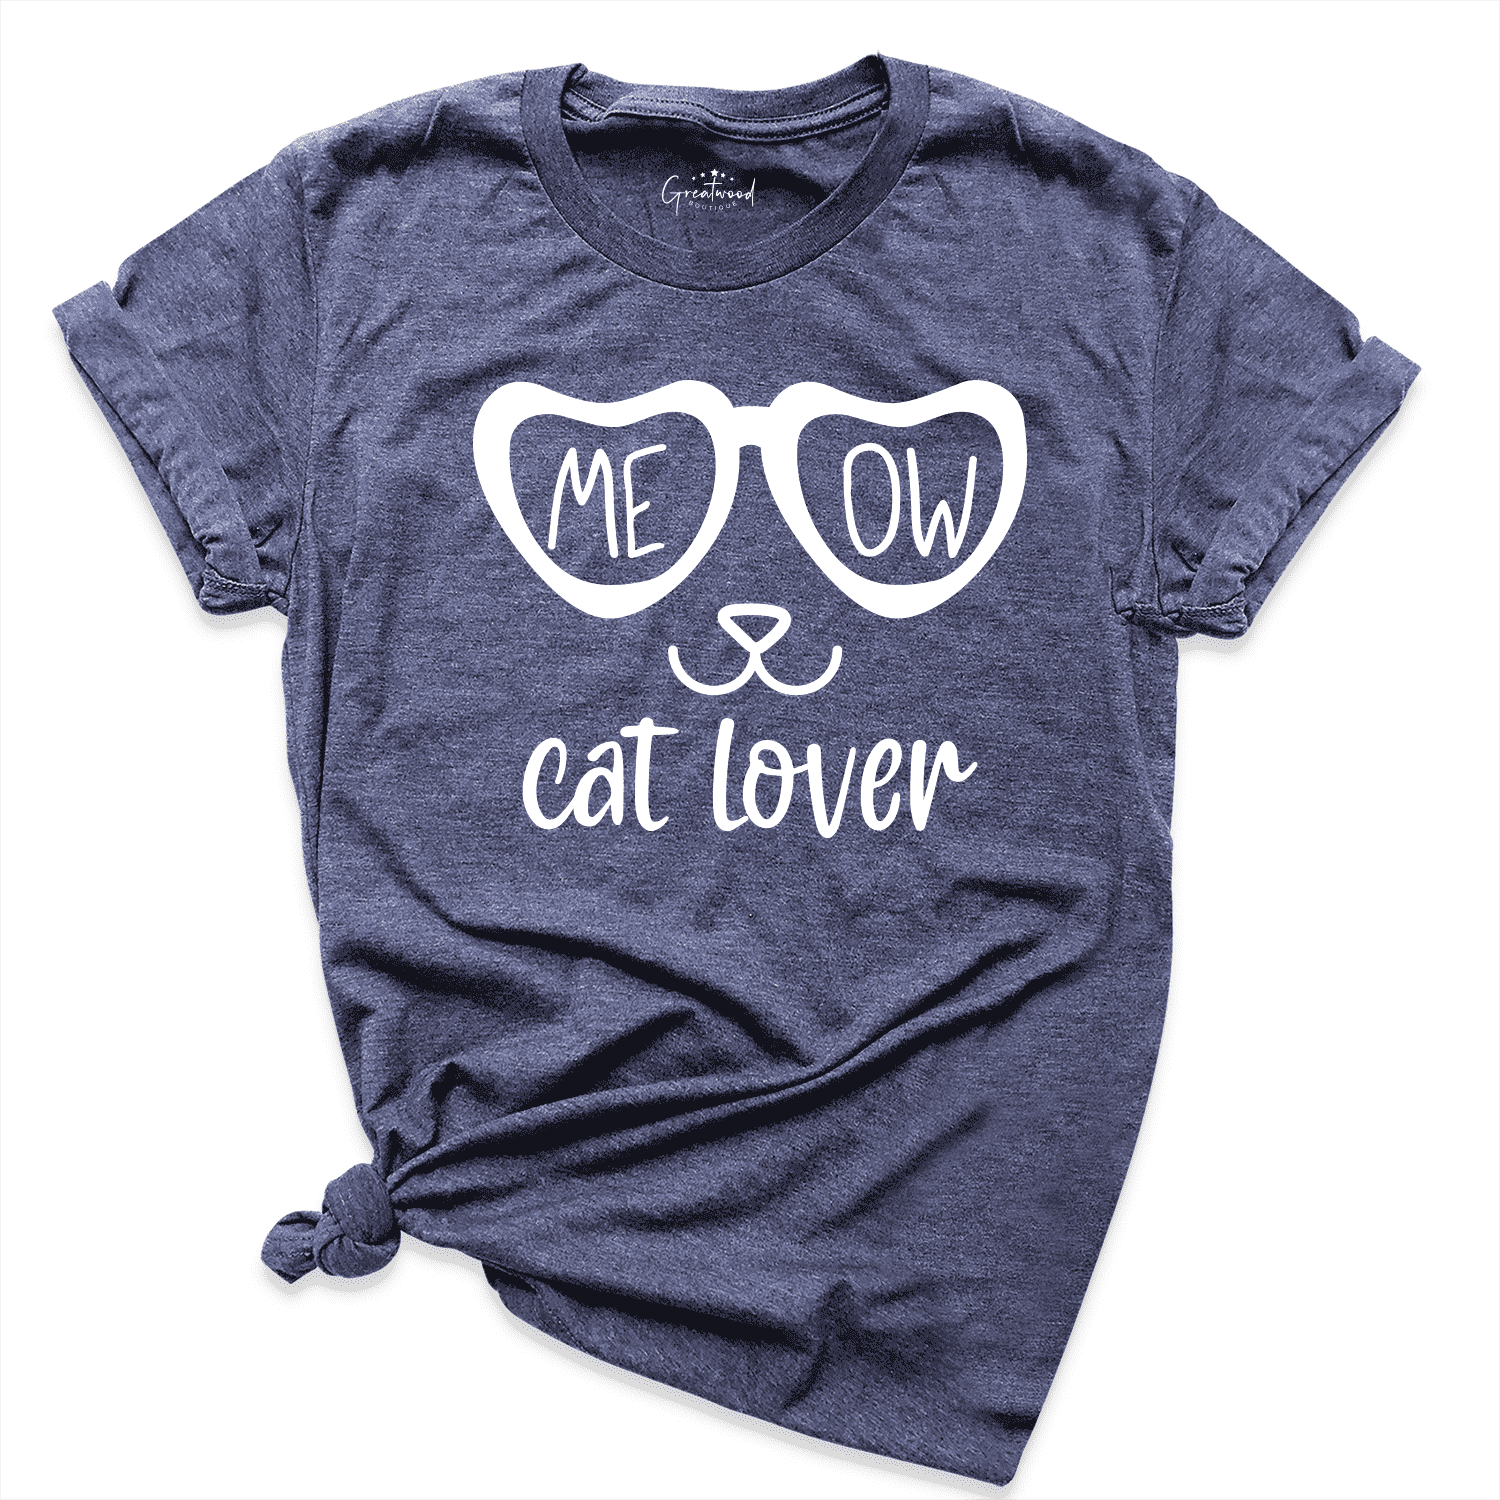 Meow Cat Lover Shirt Navy - Greatwood Boutique